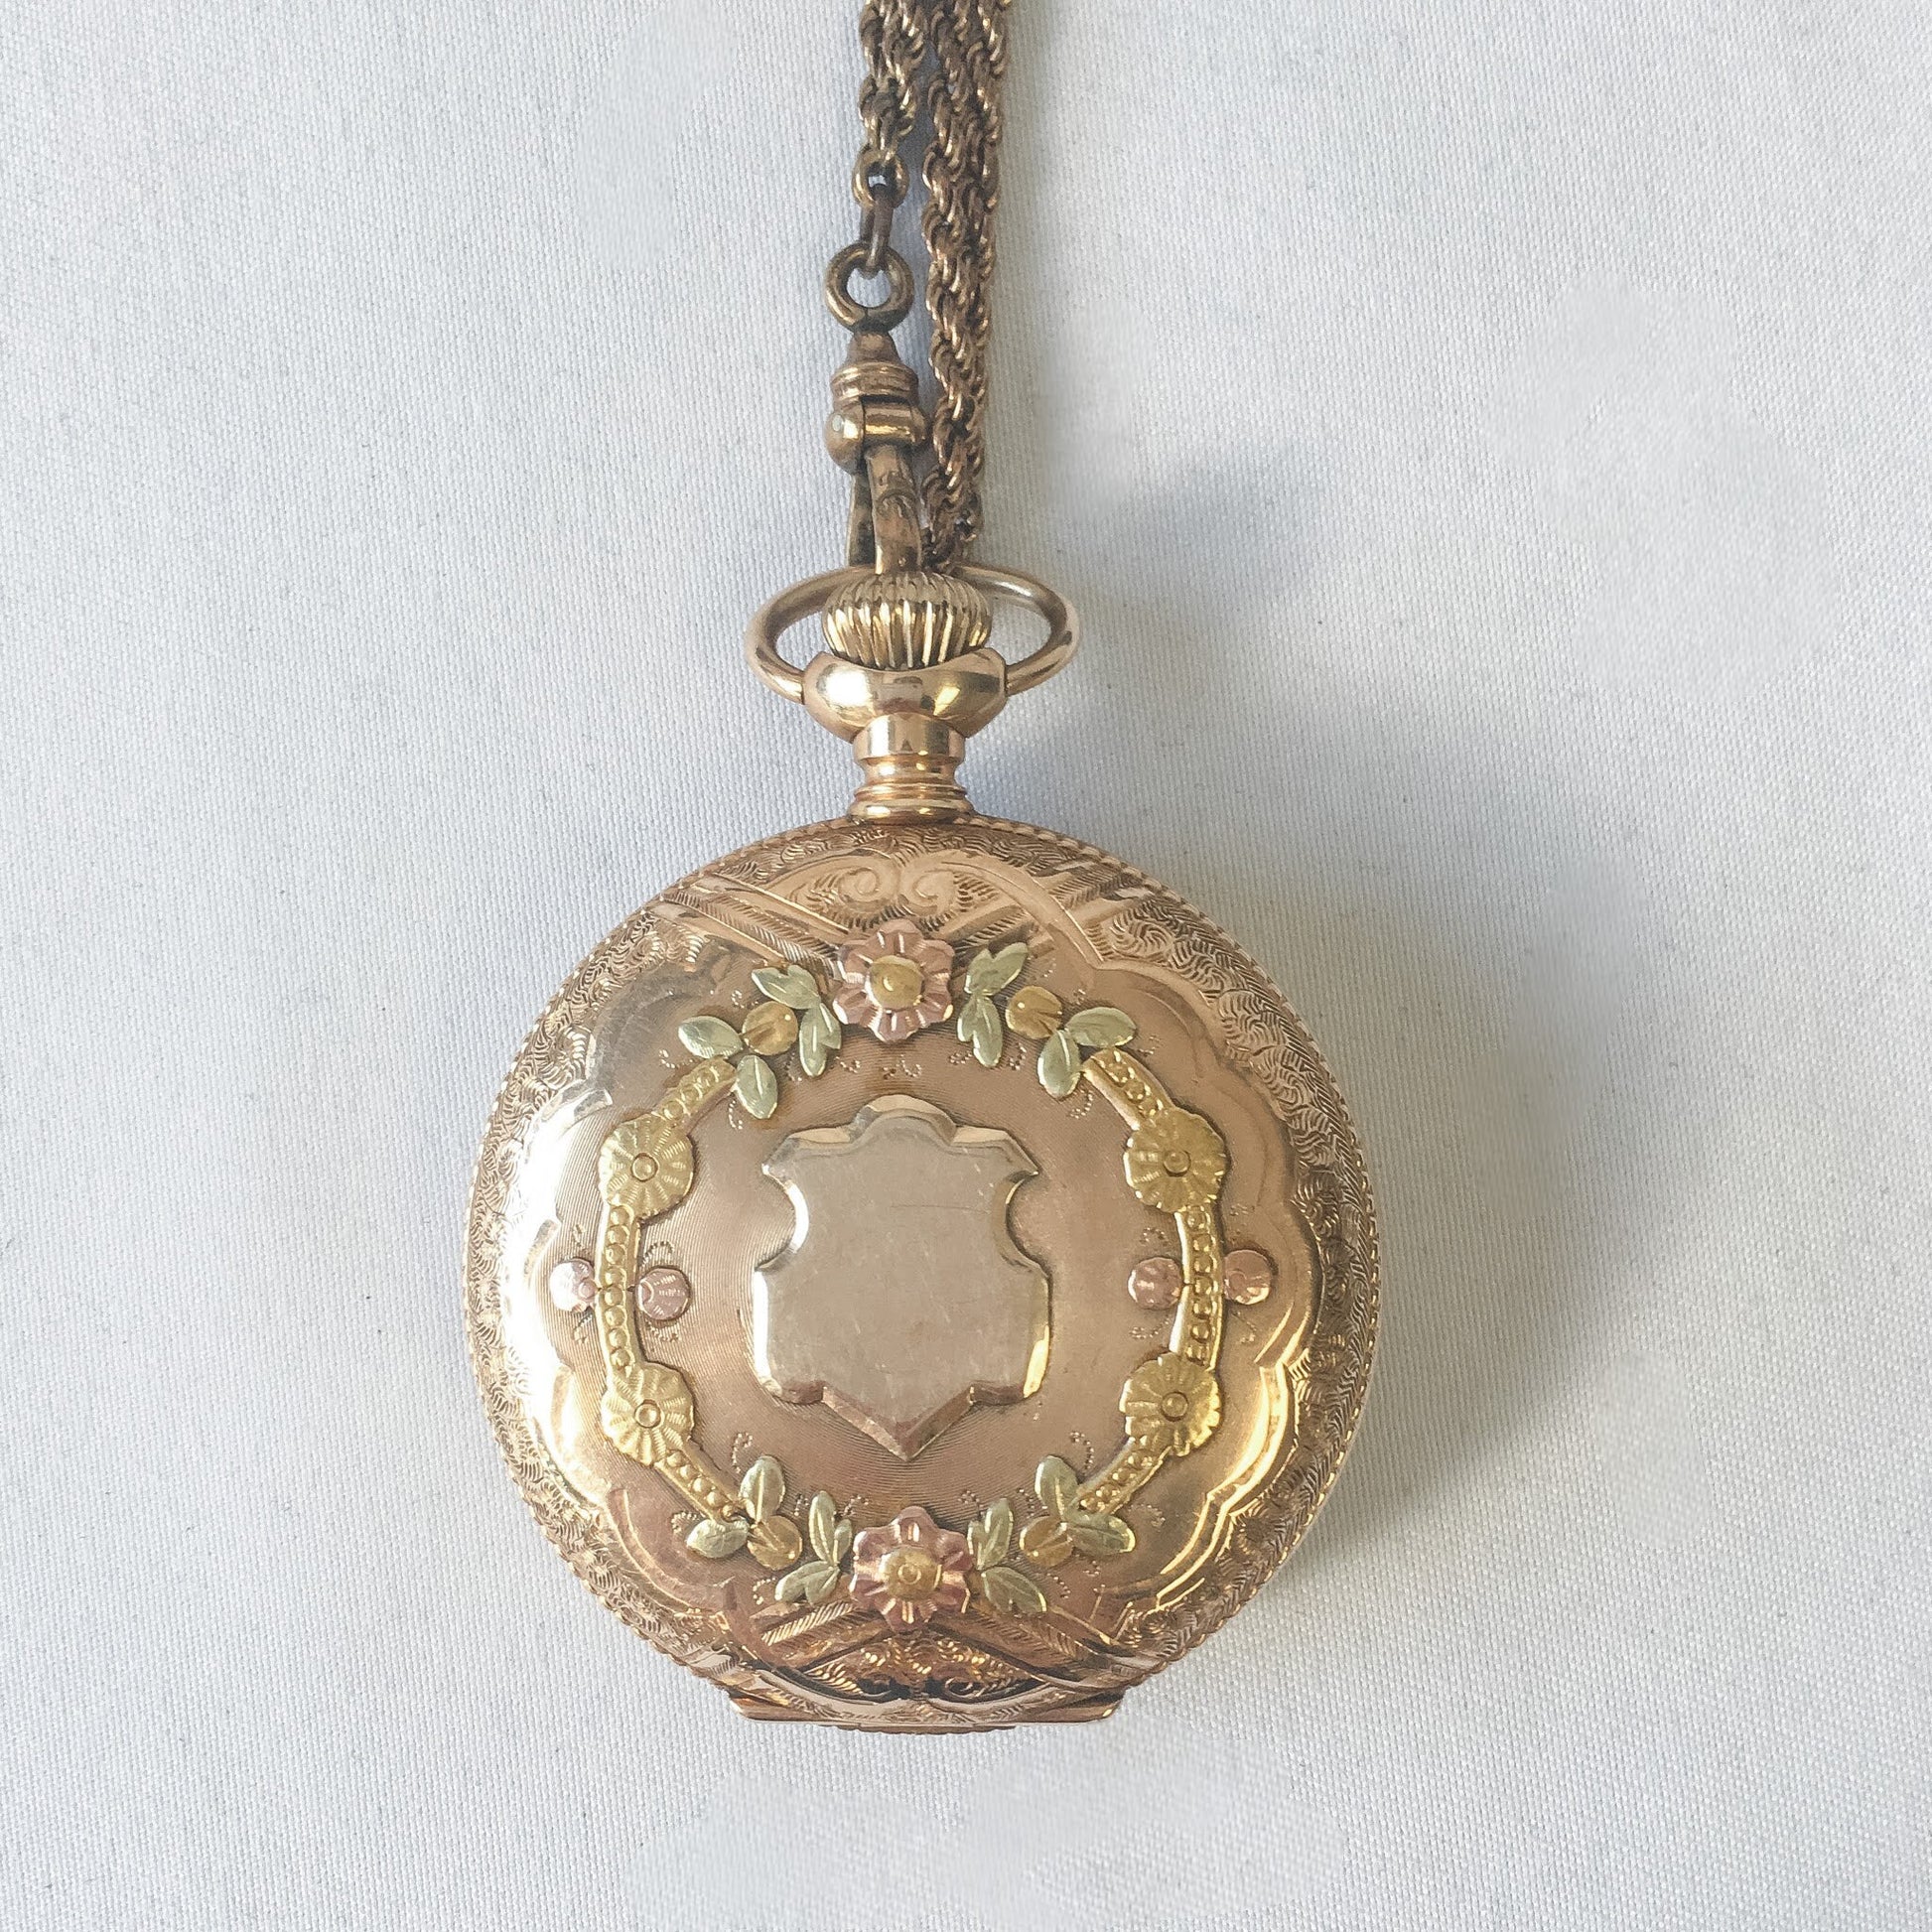 Antique 14k Hampden Gold Oceanic Floral Pocket Watch with Chain, Diamond and Gold Pocket Watch, 17 Jewel, WORKS!